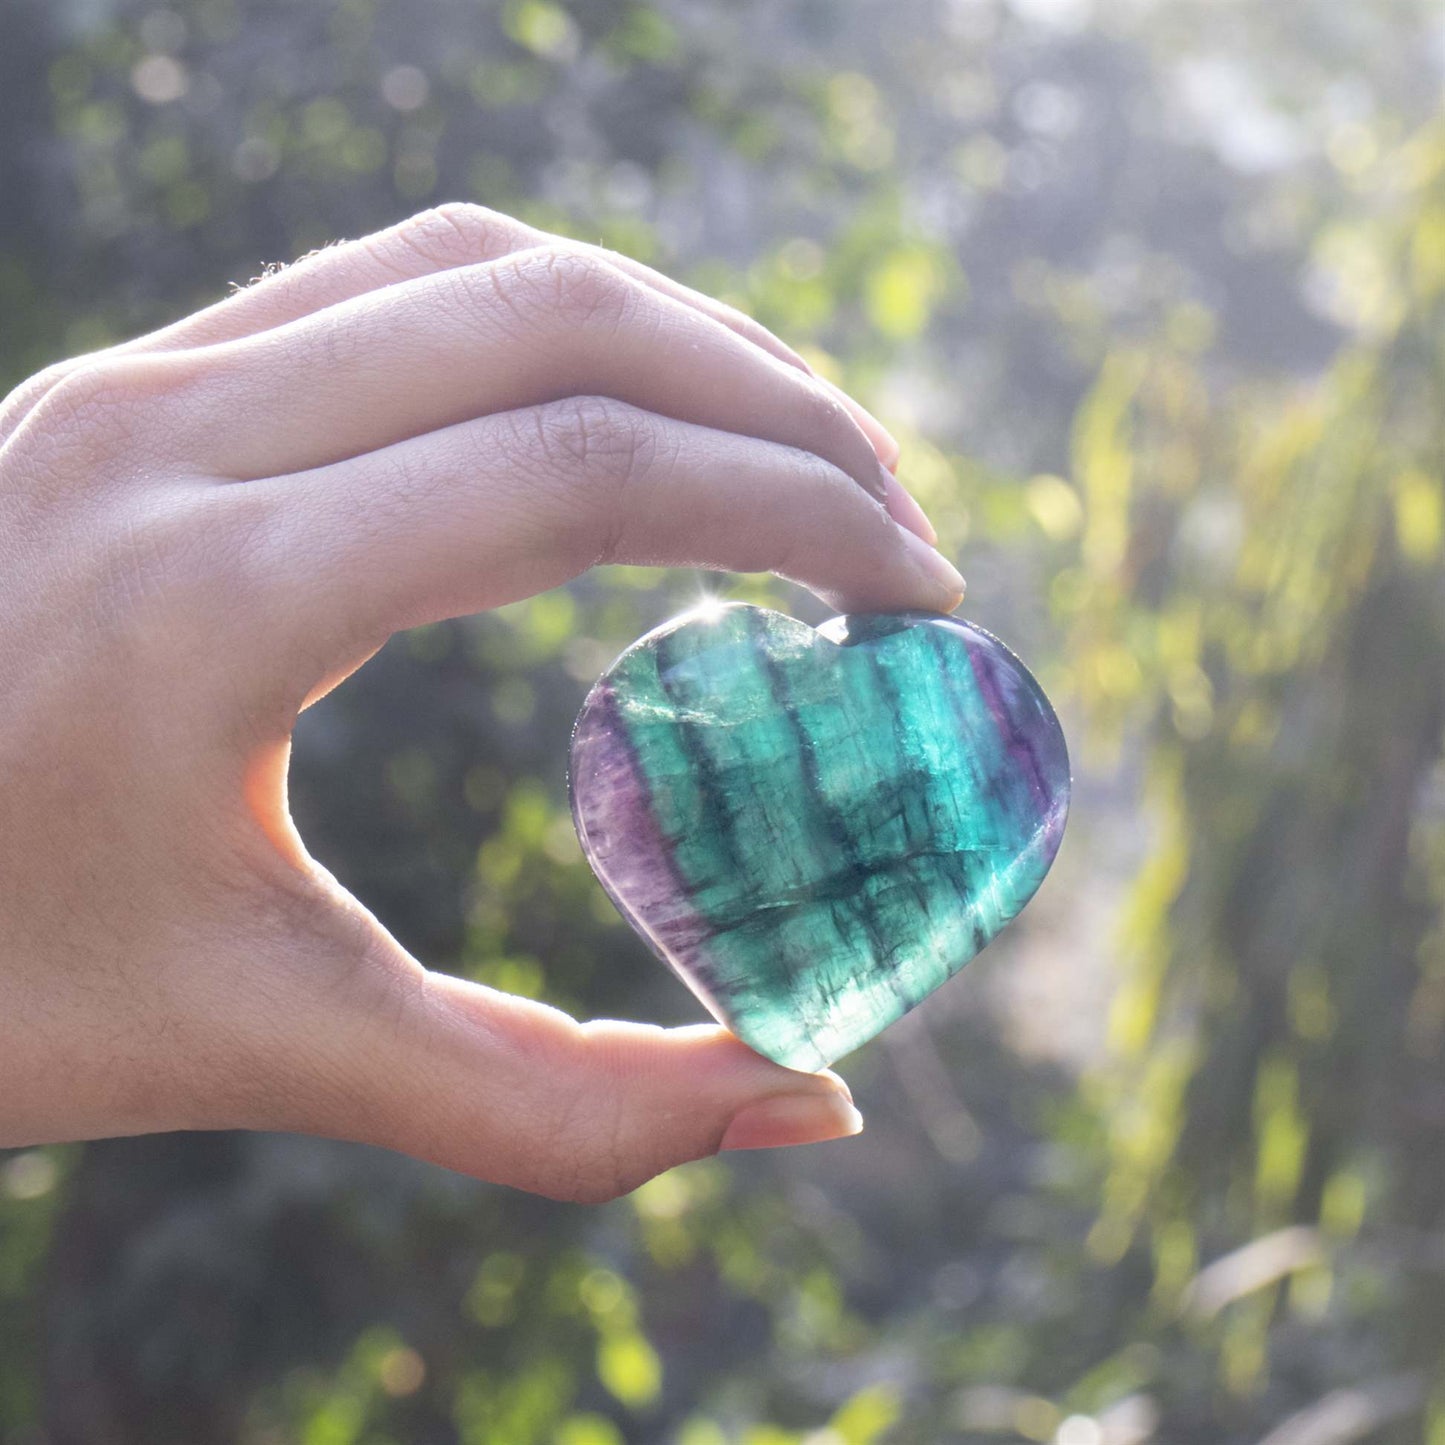 Multi Fluorite Crystal Heart Shape Stone - Focus and Clarity - TheIndianHand